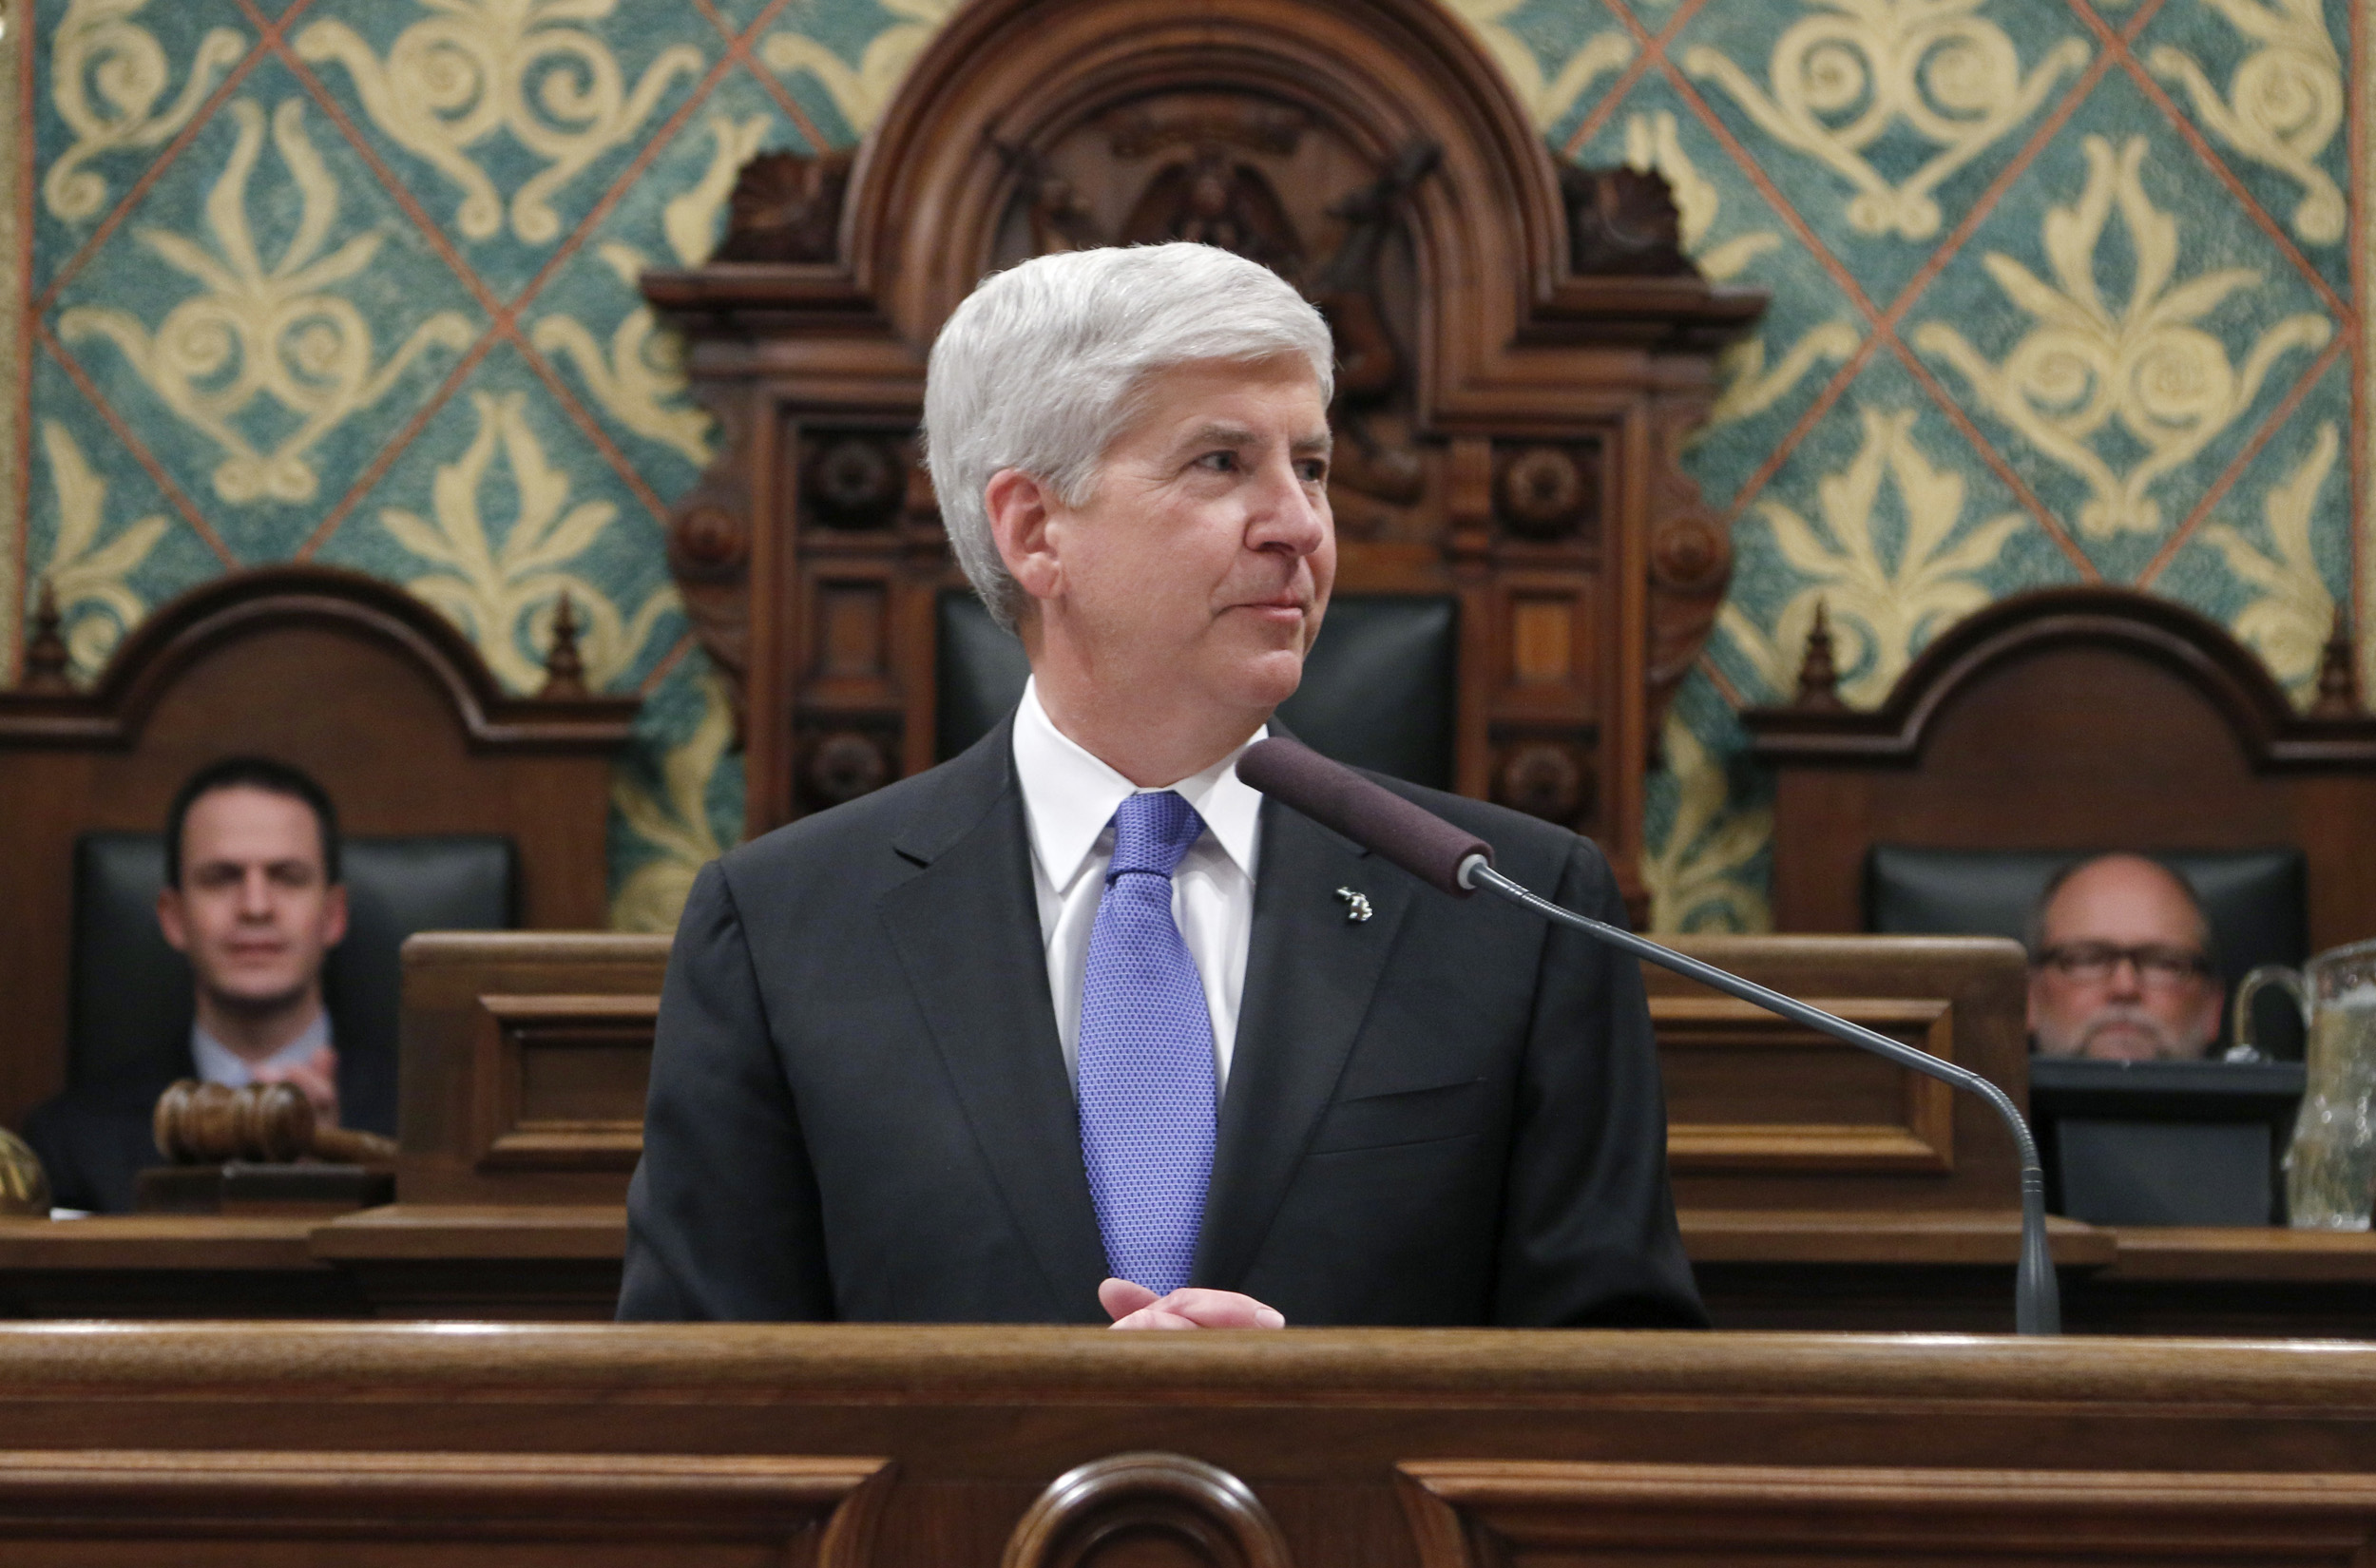 Michigan Gov. Rick Snyder delivers his State of the State address in Lansig, Mich. on Jan. 20, 2015. (Al Goldis—AP)